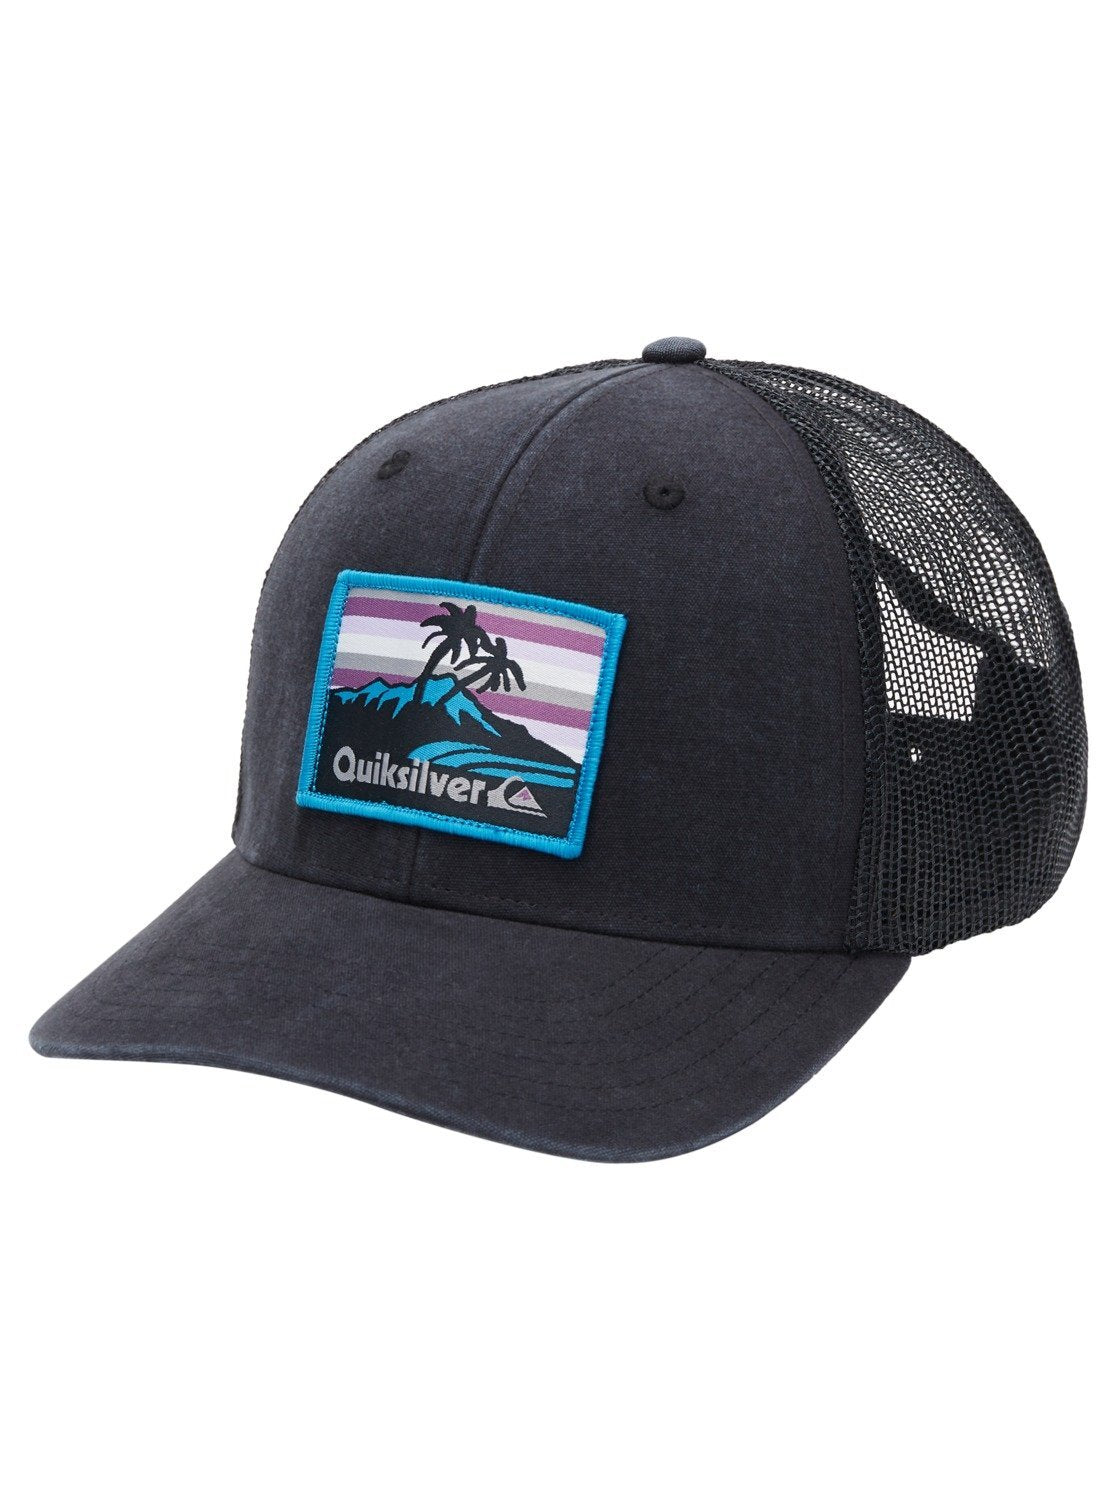 Quiksilver Clean Meanie Snapback Hat KVJ0 OS